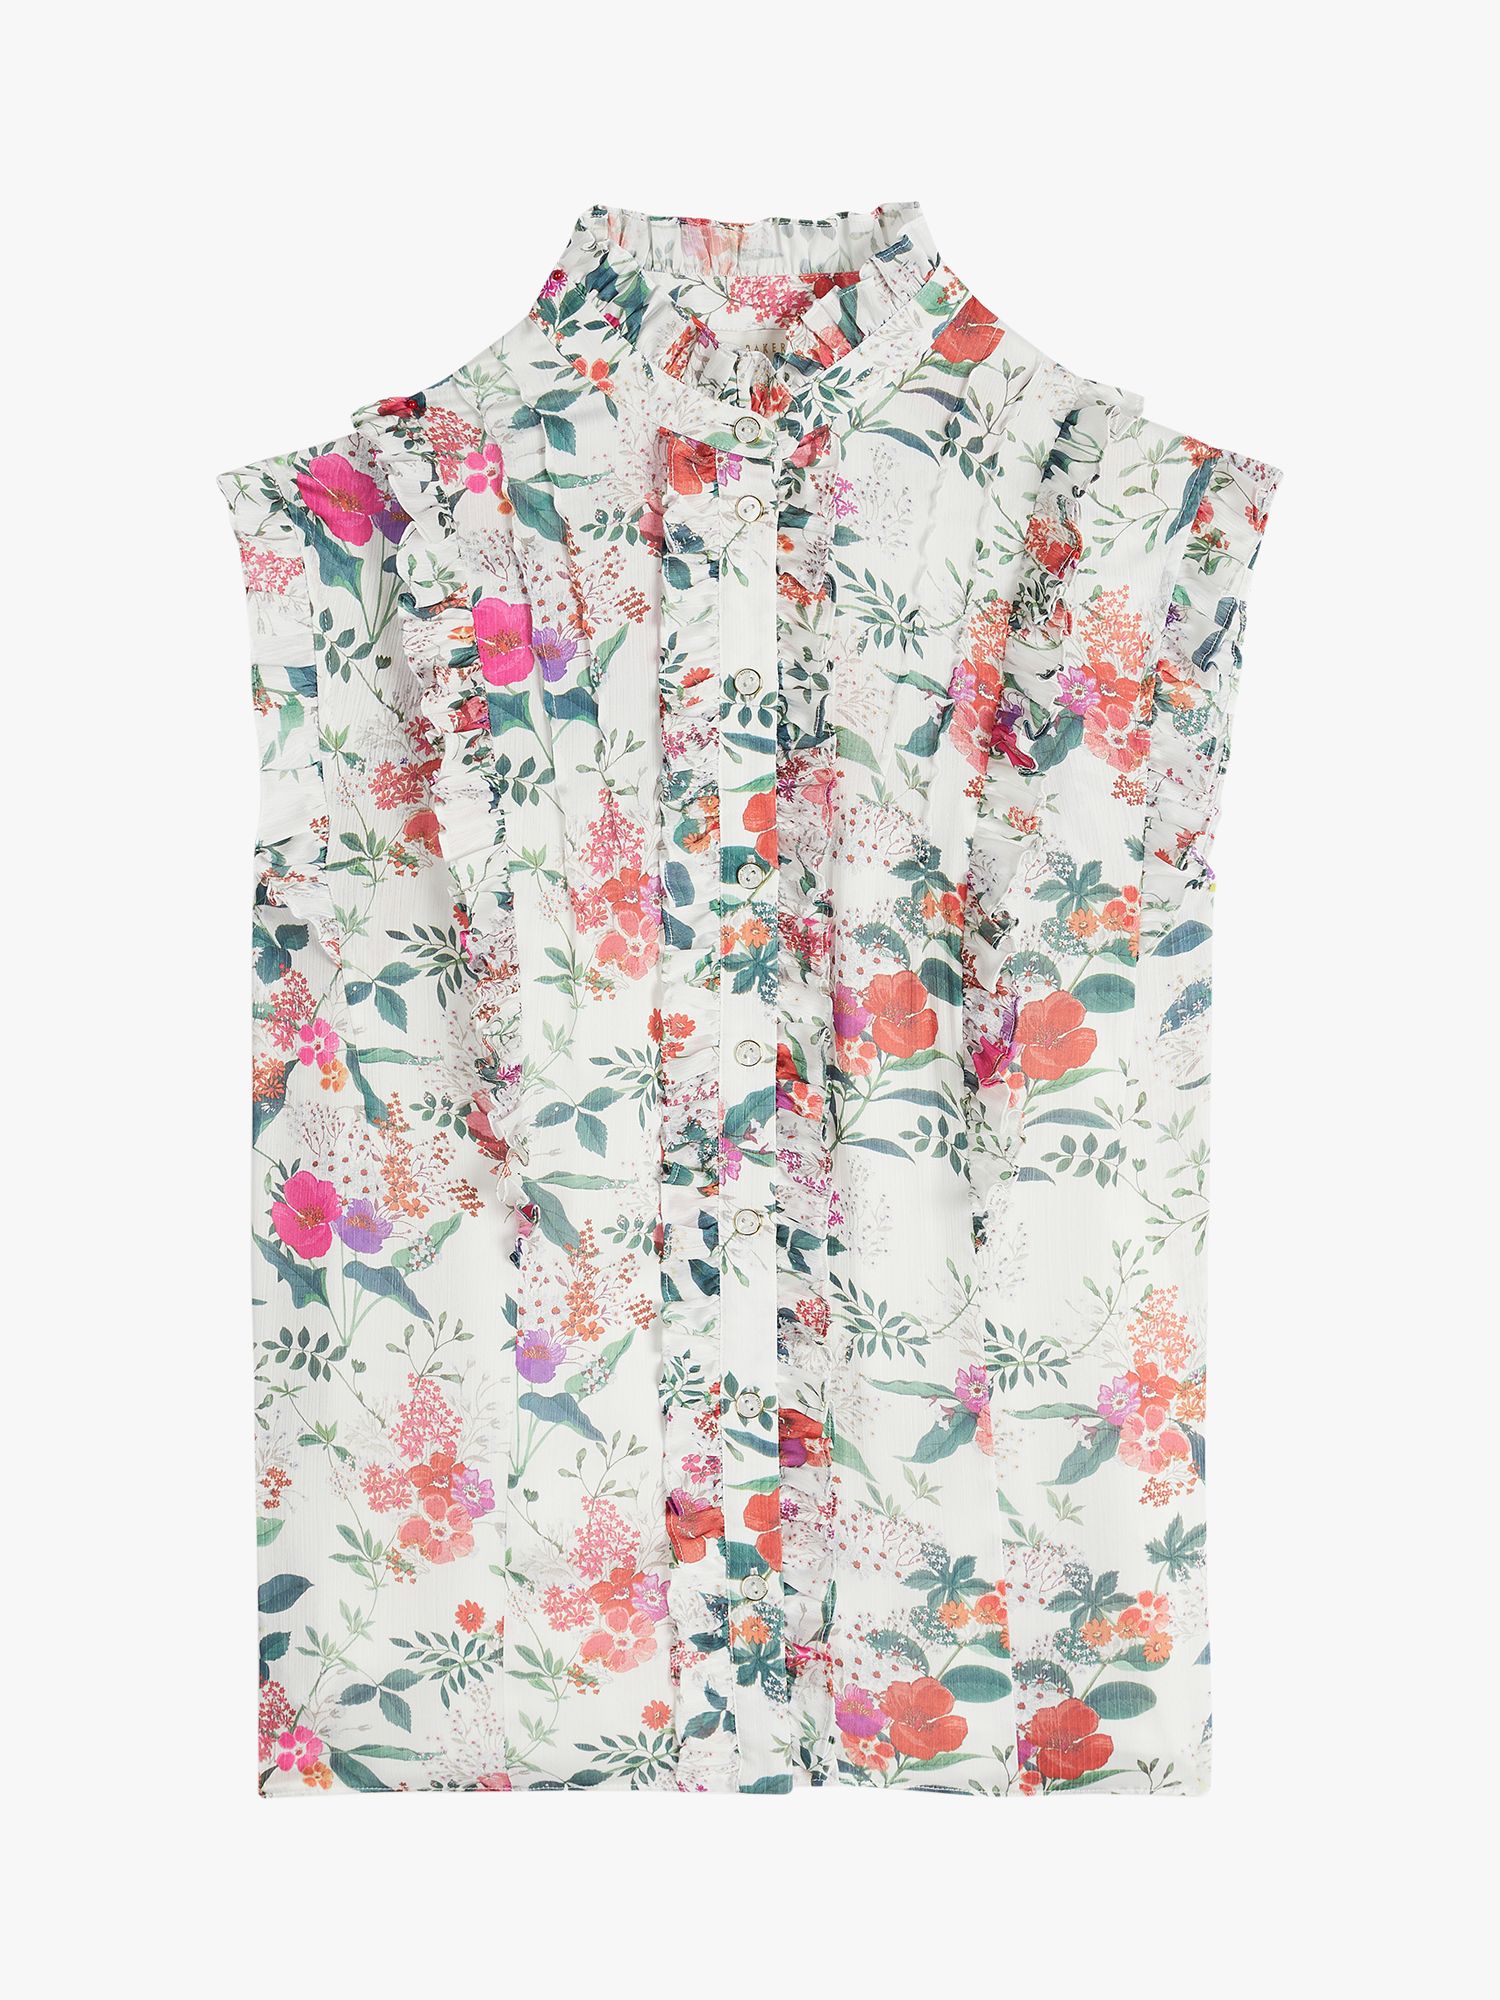 Ted Baker Maddox Floral Print Top, White/Multi